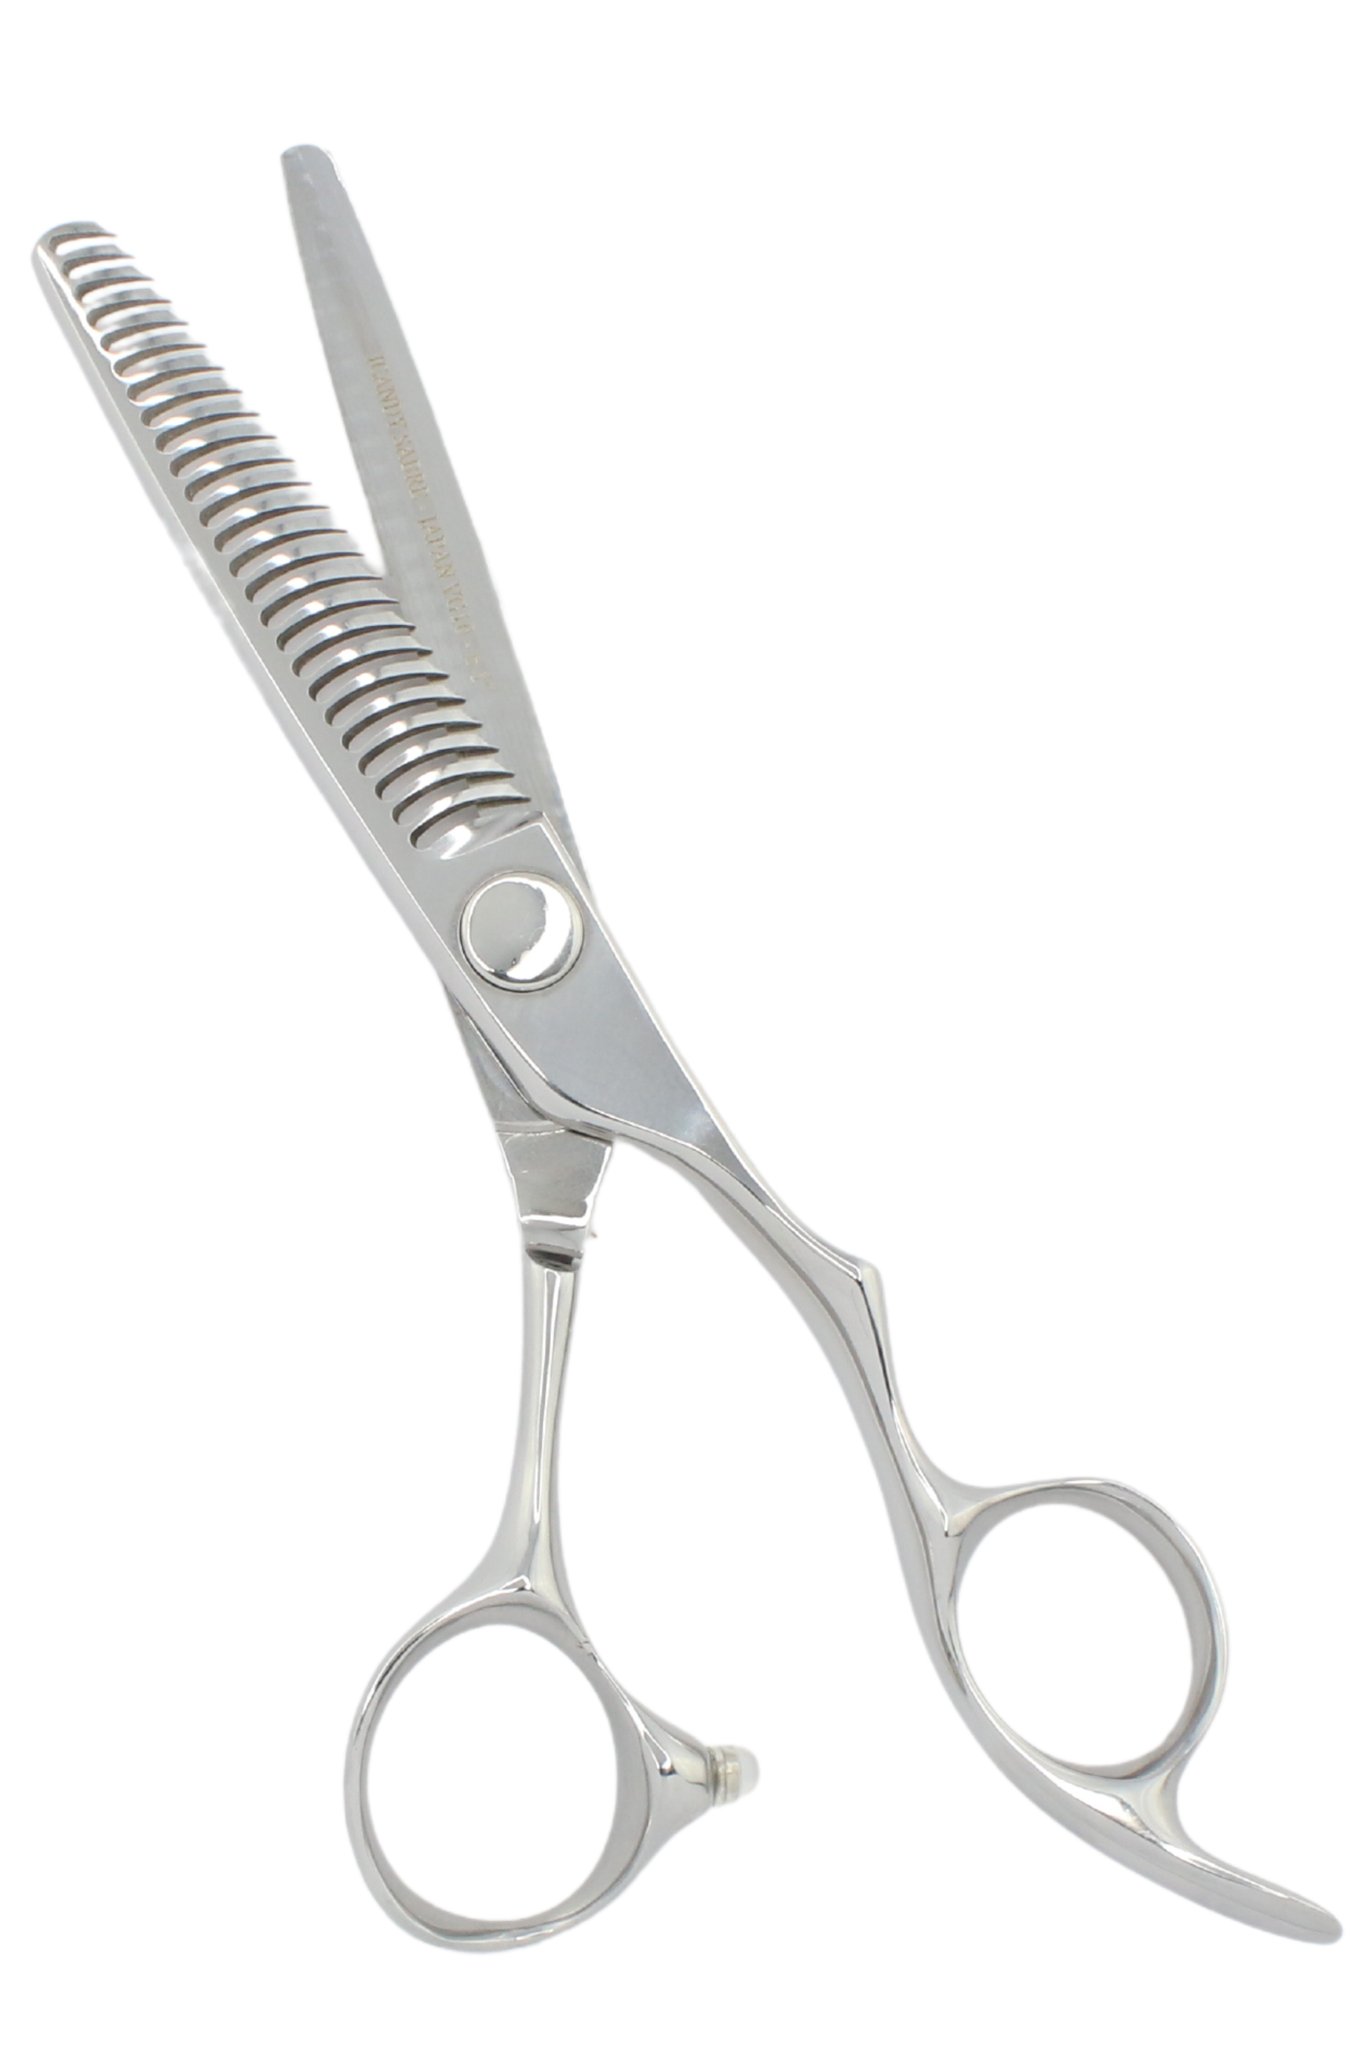 iCandy SABRE VG10 Thinning Scissors (6.1 inch) pic2